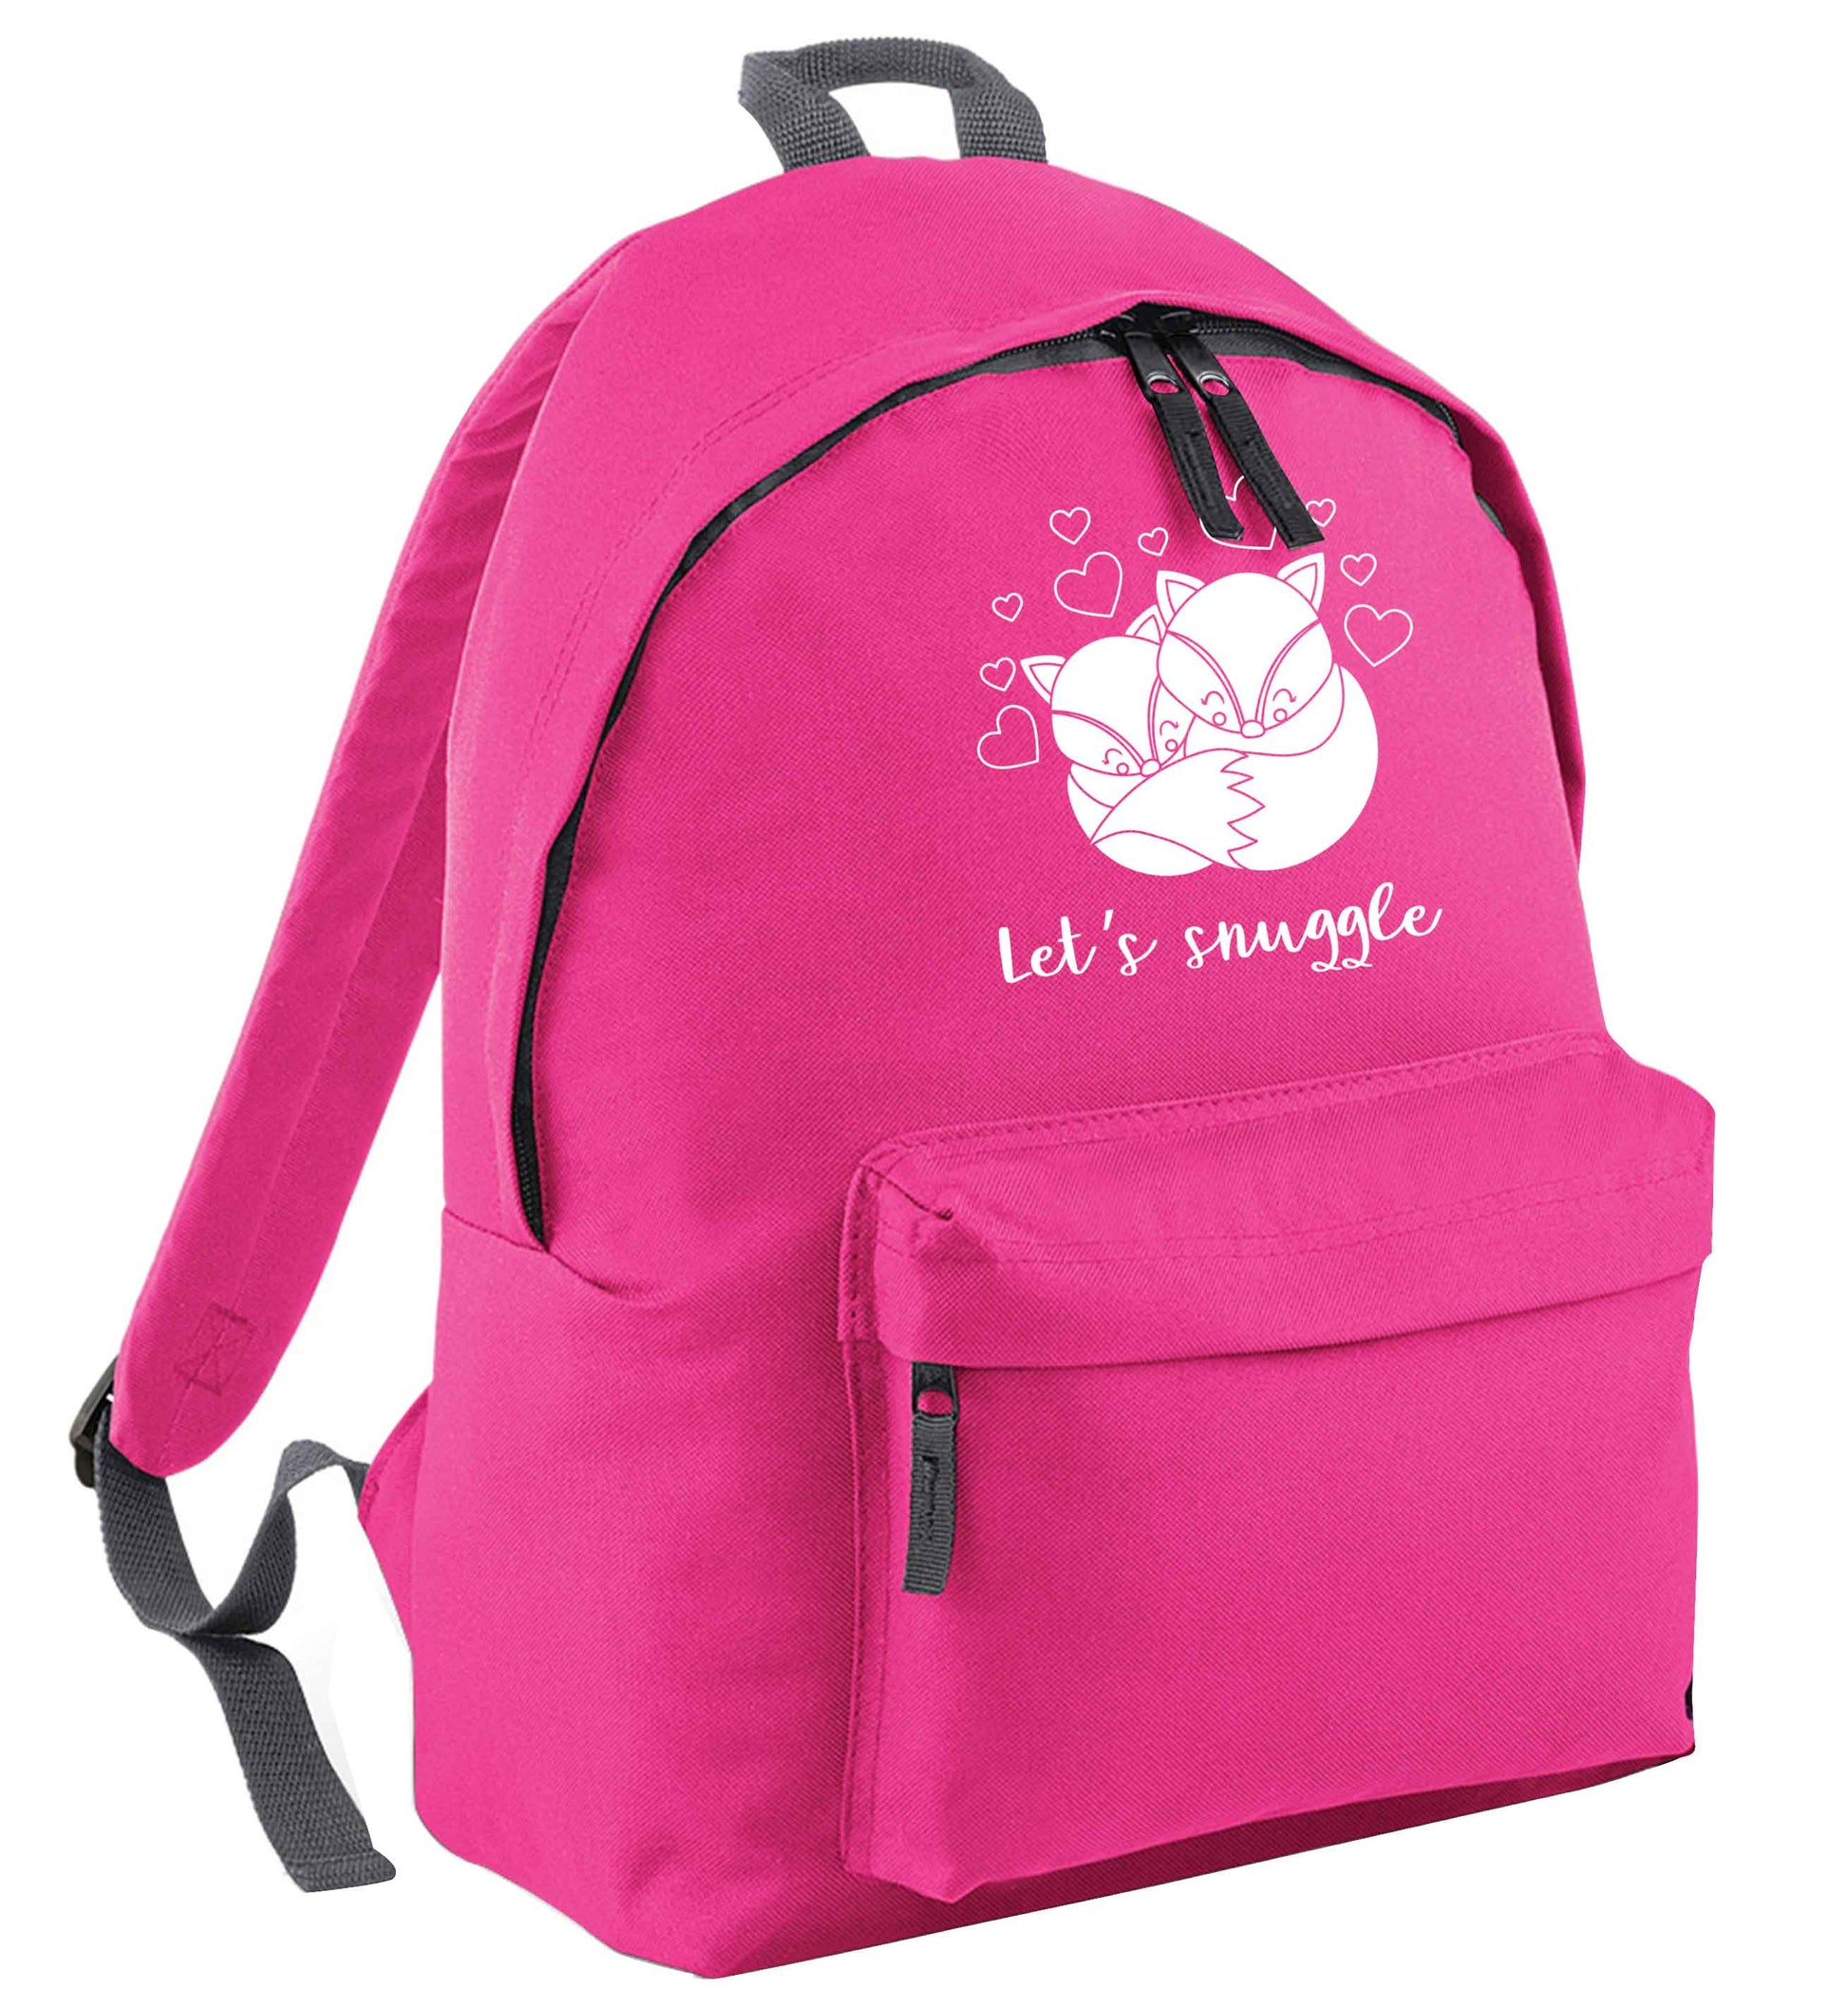 Let's snuggle pink adults backpack